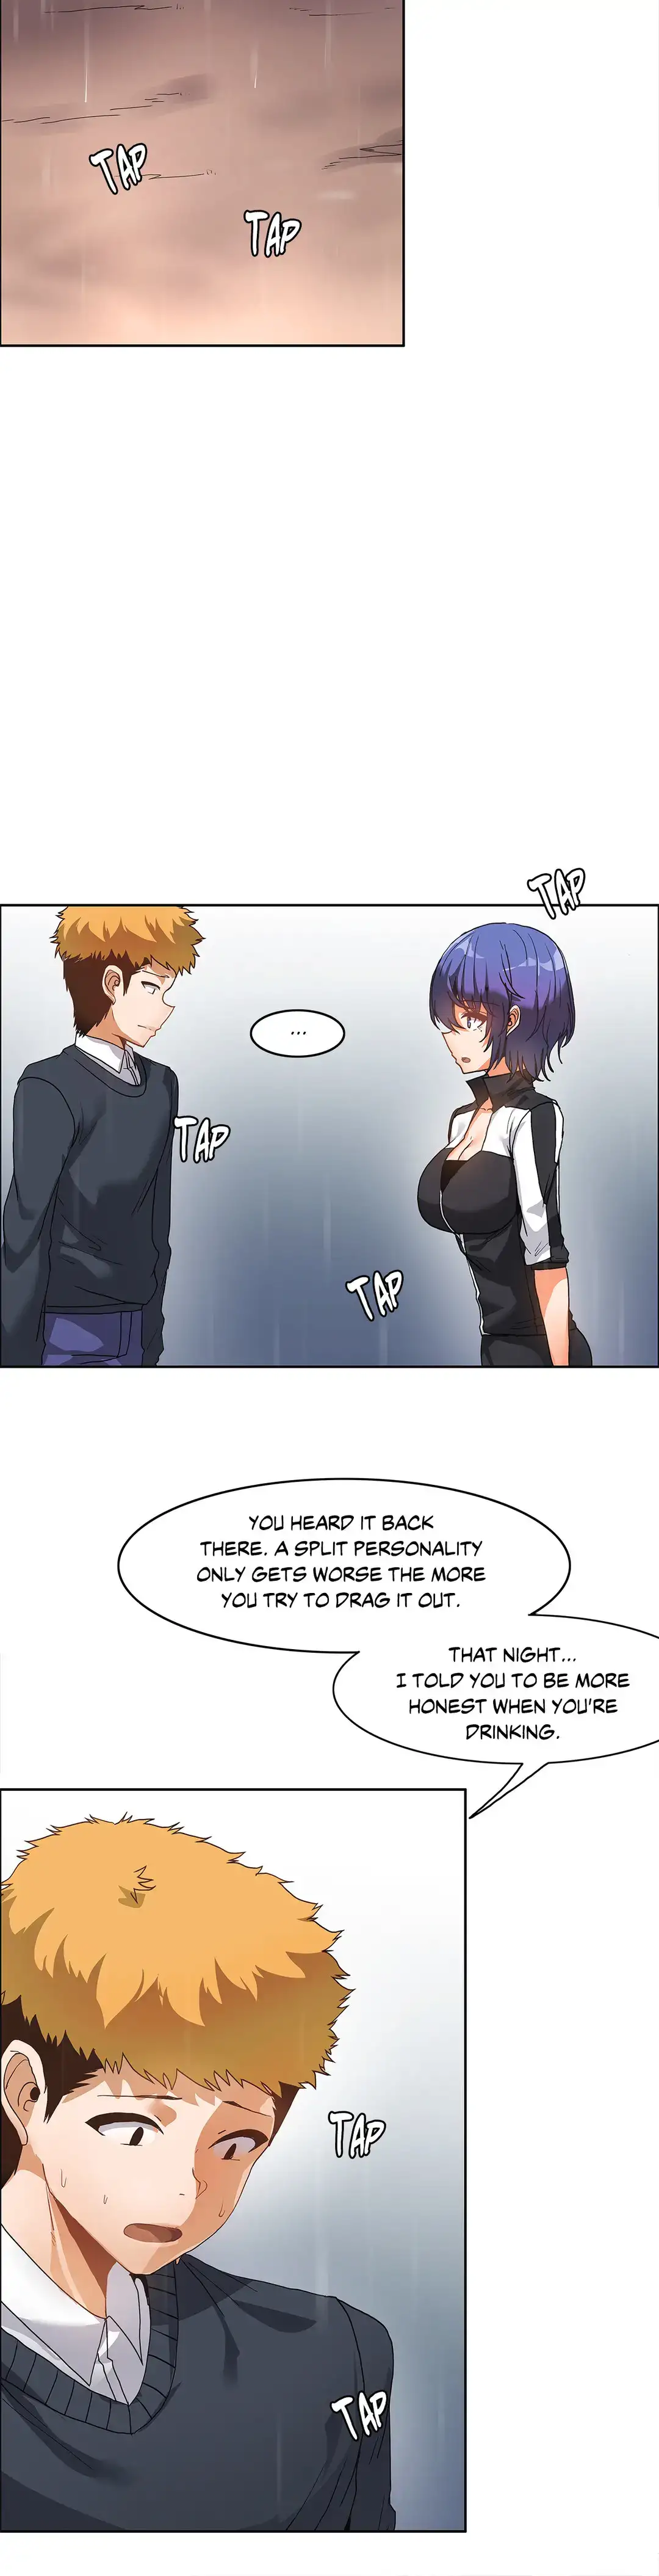 The Girl That Wet the Wall - Chapter 52 Page 10